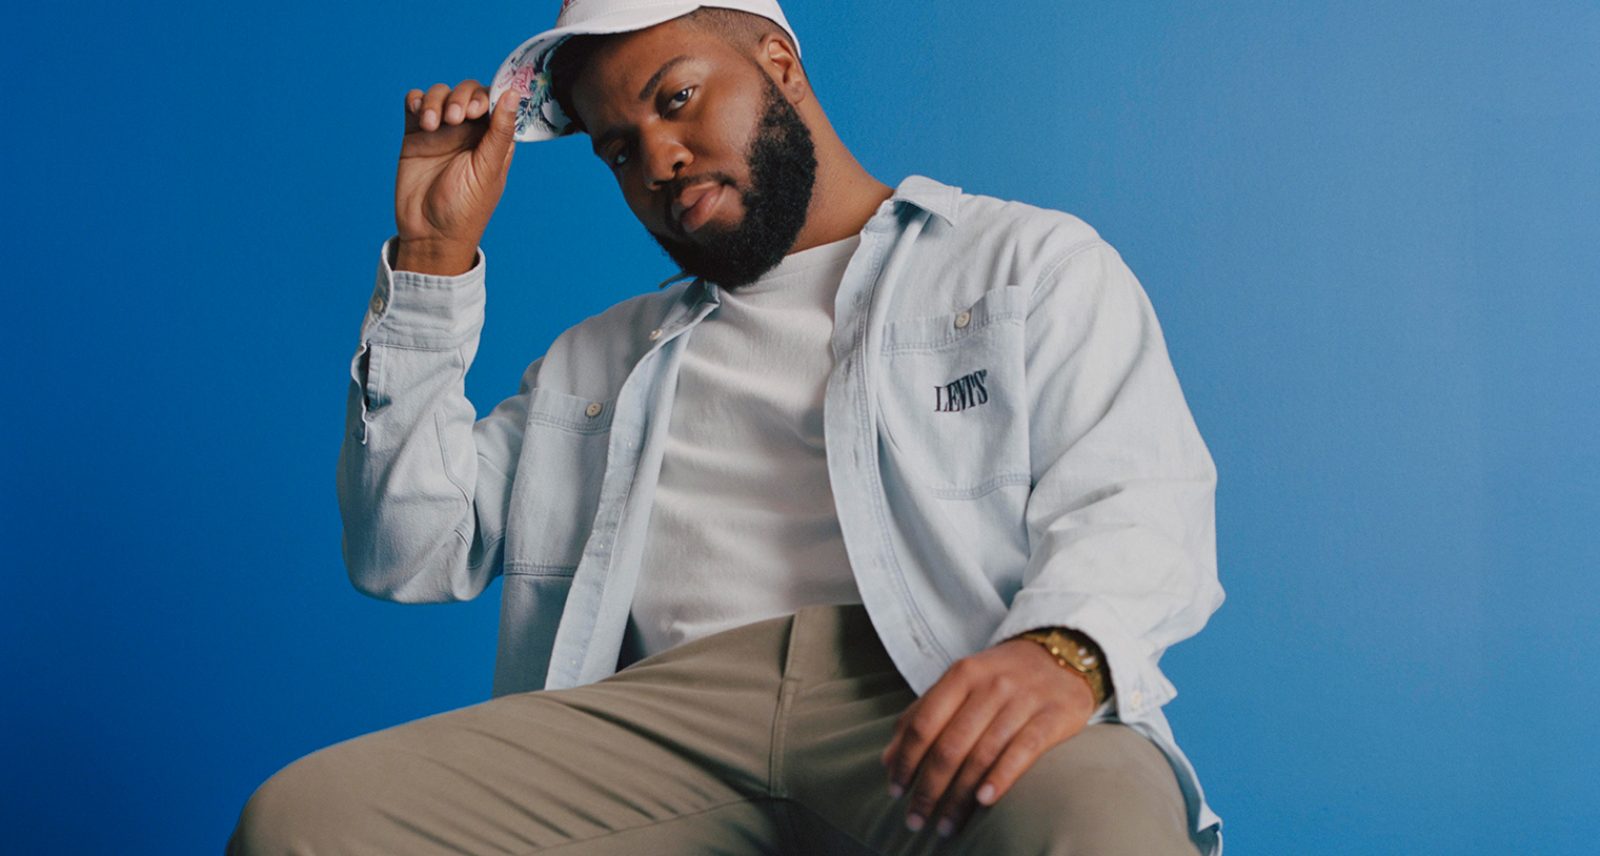 Khalid and Levi’s Make a Case for Wearing Chinos to Your Super Bowl Party